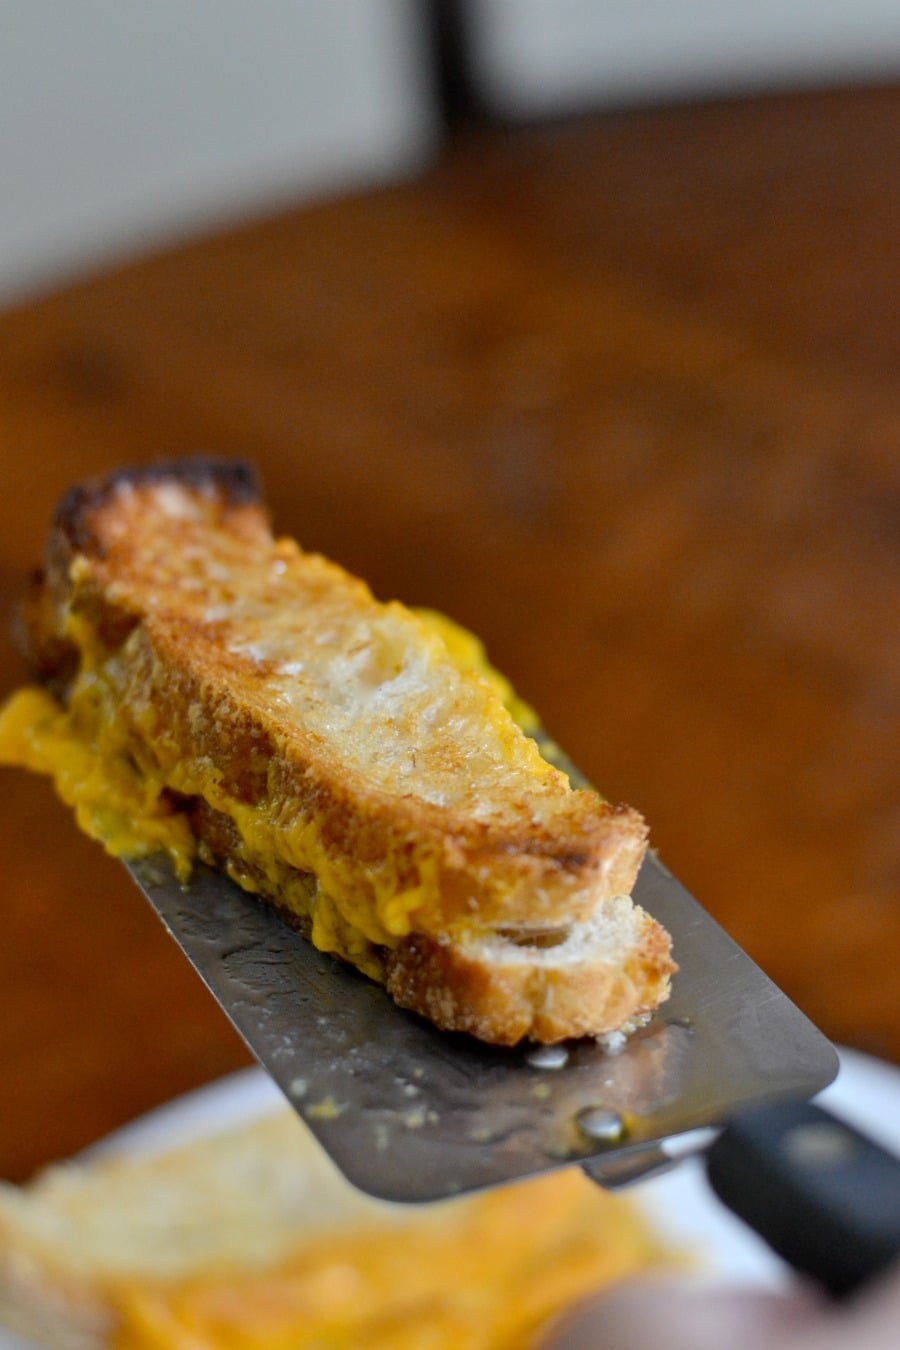 Baking the grilled cheese gives the perfect texture